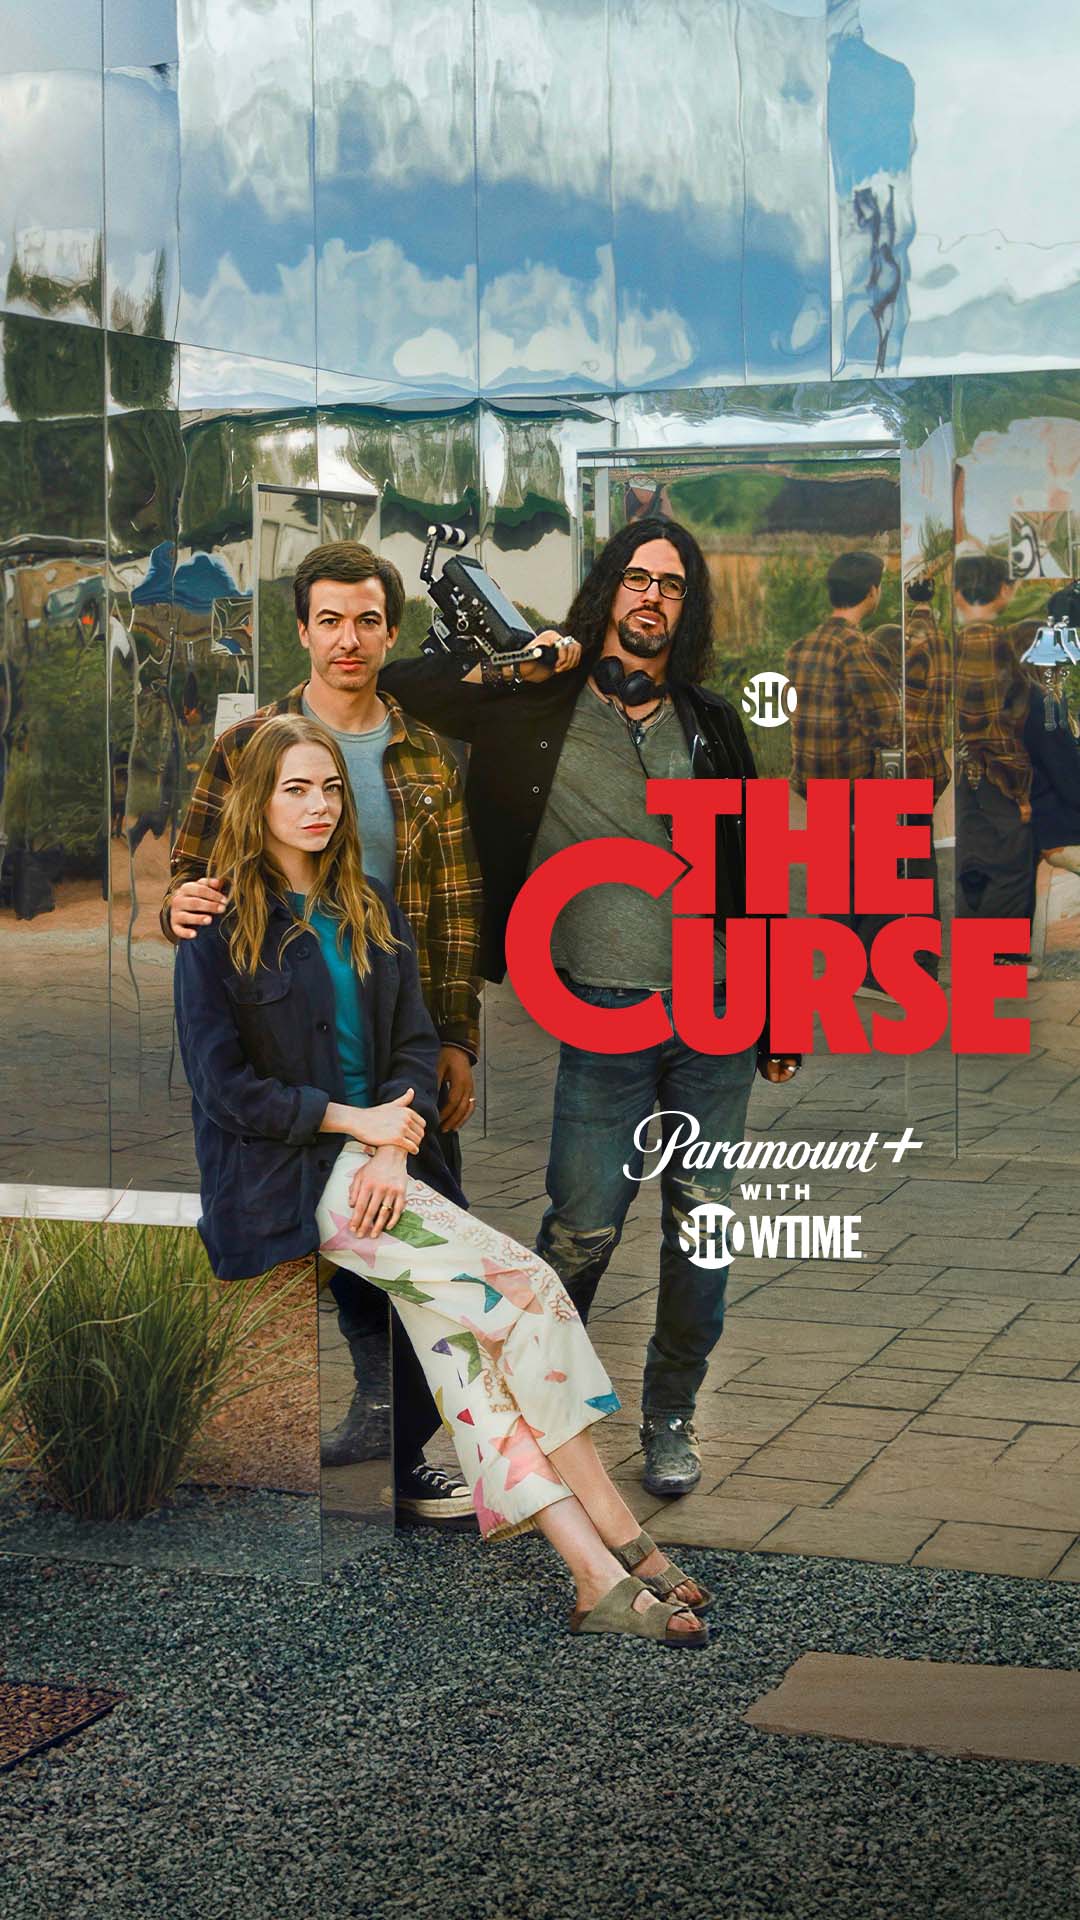 The Curse, on Paramount+ with Showtime